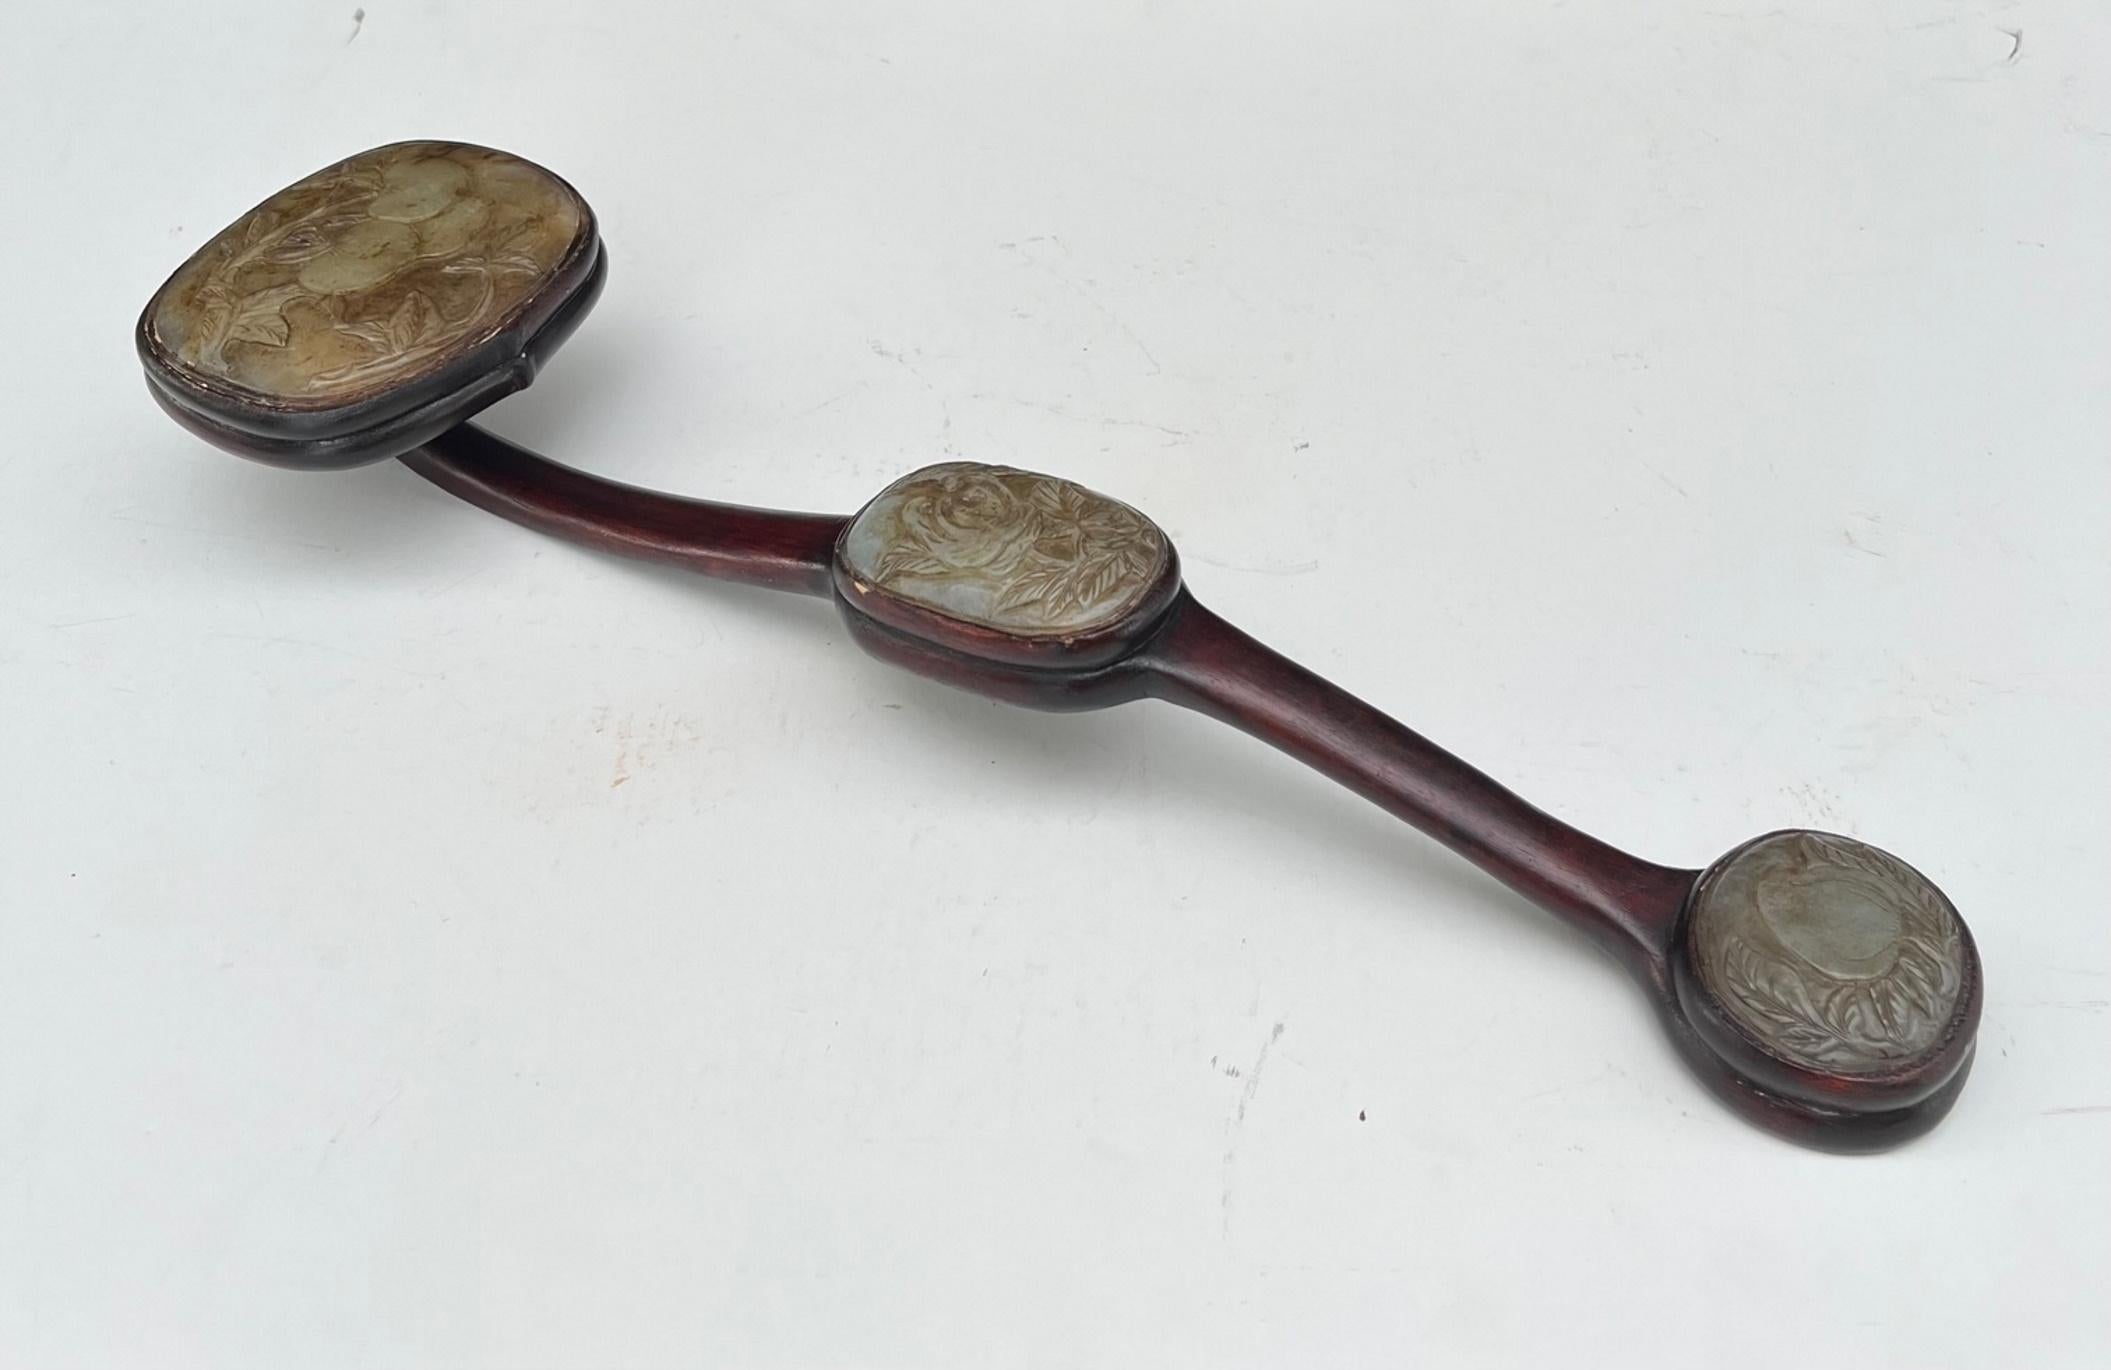 Chinese Russet Jade hardwood Imperial Ruyi Scepter Qing Dynasty 19th century, Provenance.

Large Chinese Qing Dynasty jade Ruyi scepter with three beautiful relief carved domed russet jade panels in graduating size. The panels feature designs of